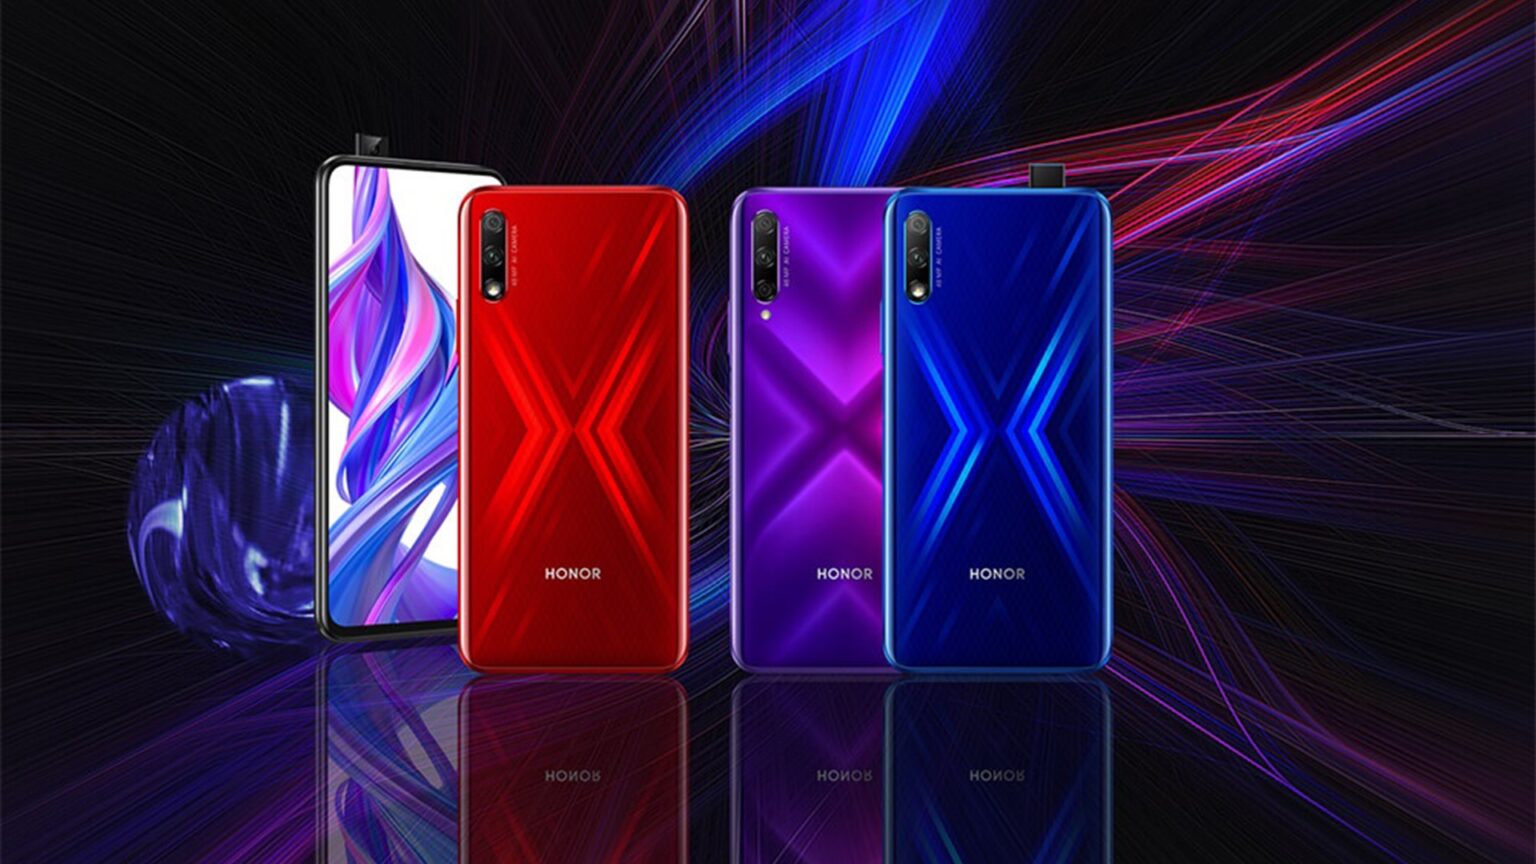 HONOR 9X Pro Start Sale Moves Online this 17 April